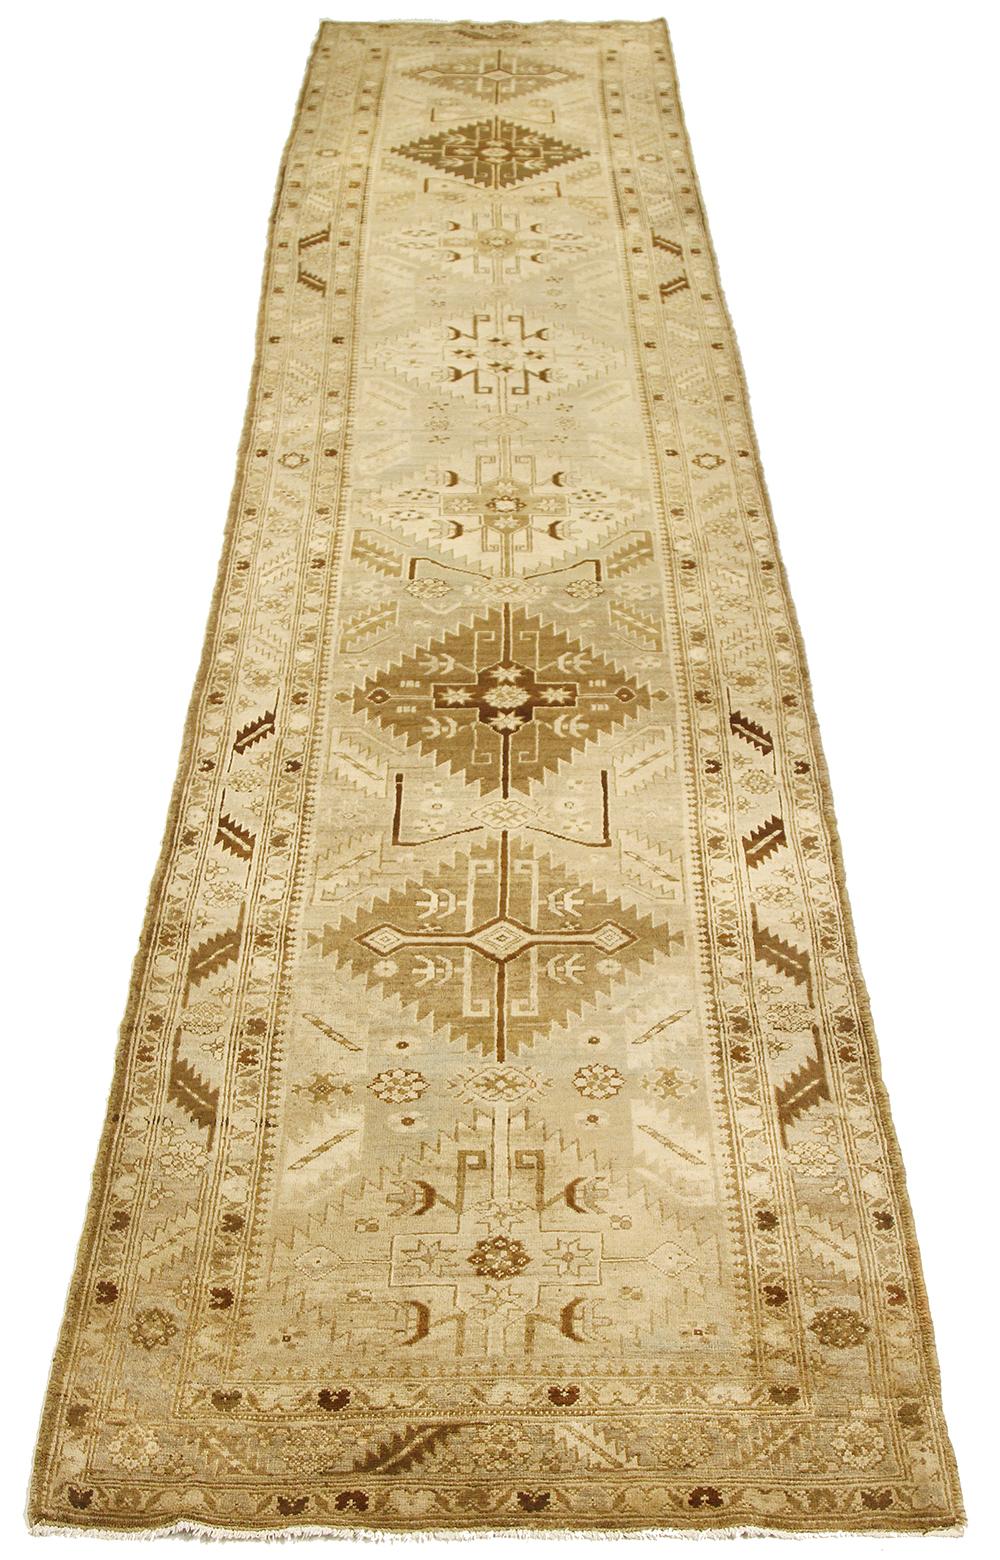 Antique Persian runner rug handwoven from the finest sheep’s wool and colored with all-natural vegetable dyes that are safe for humans and pets. It’s a traditional Heriz design featuring a lovely ivory field covered with brown tribal details. It’s a